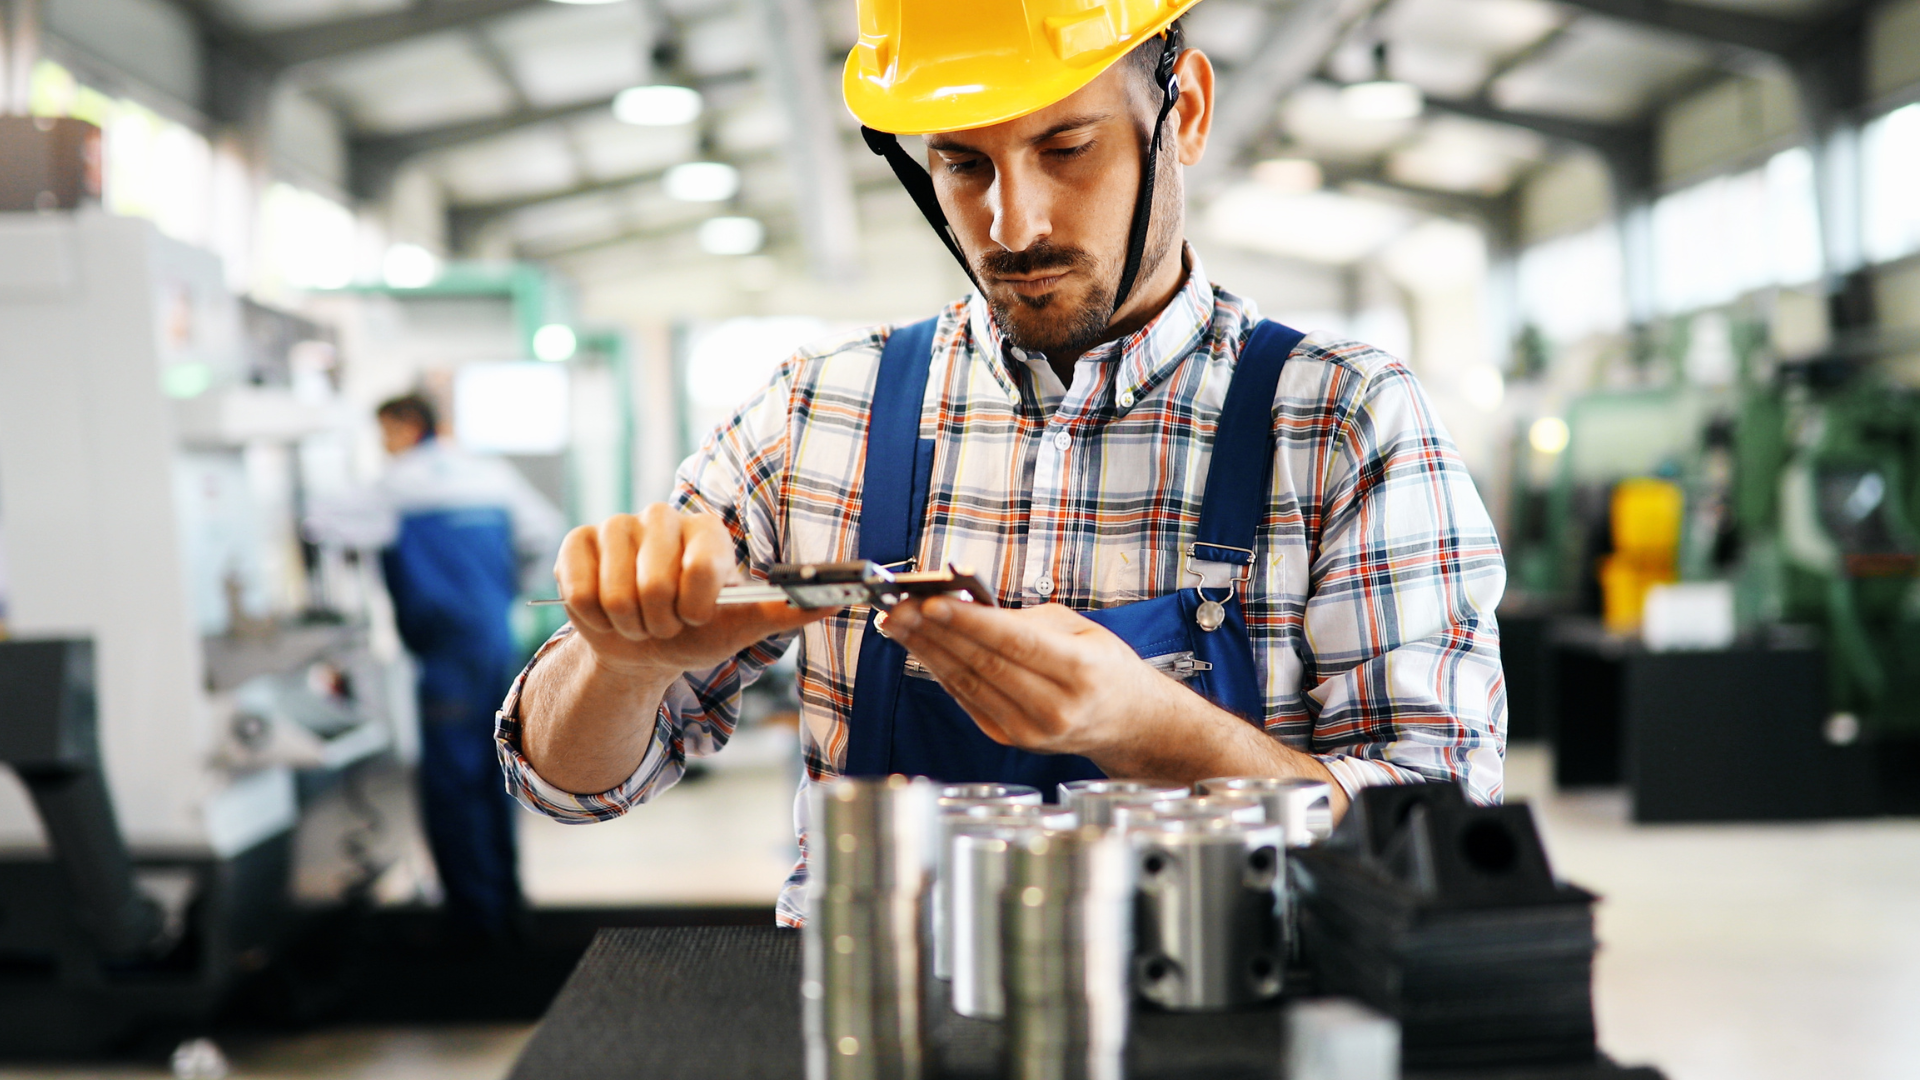 A Guide To Keeping Your Employees Safe in the Manufacturing Industry